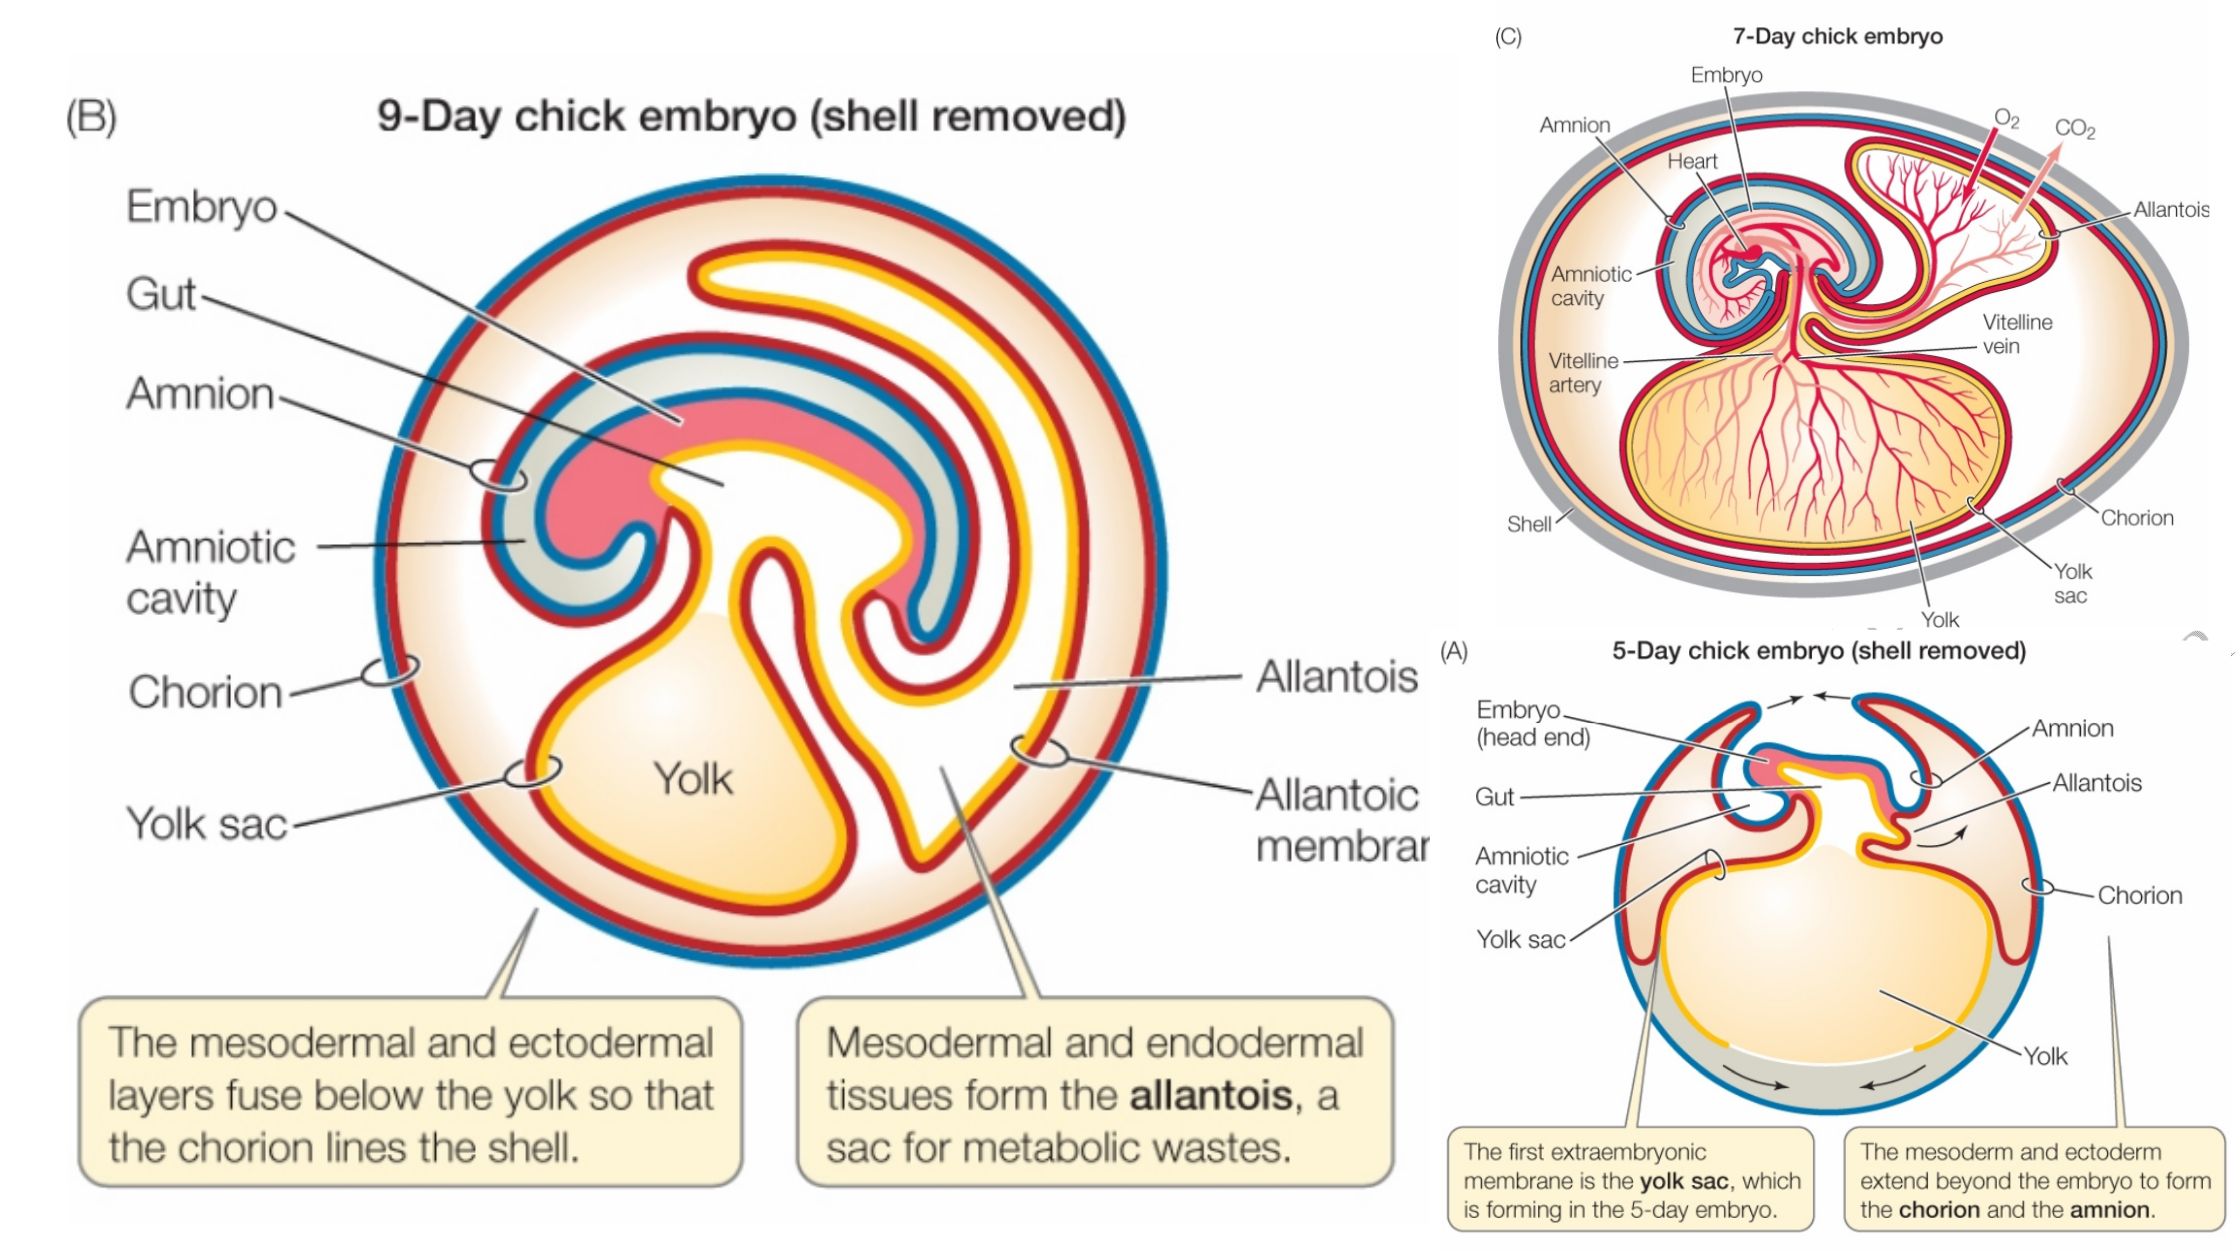 Extra-embryonic Membranes in Chick - Definition, Types, Development, Functions